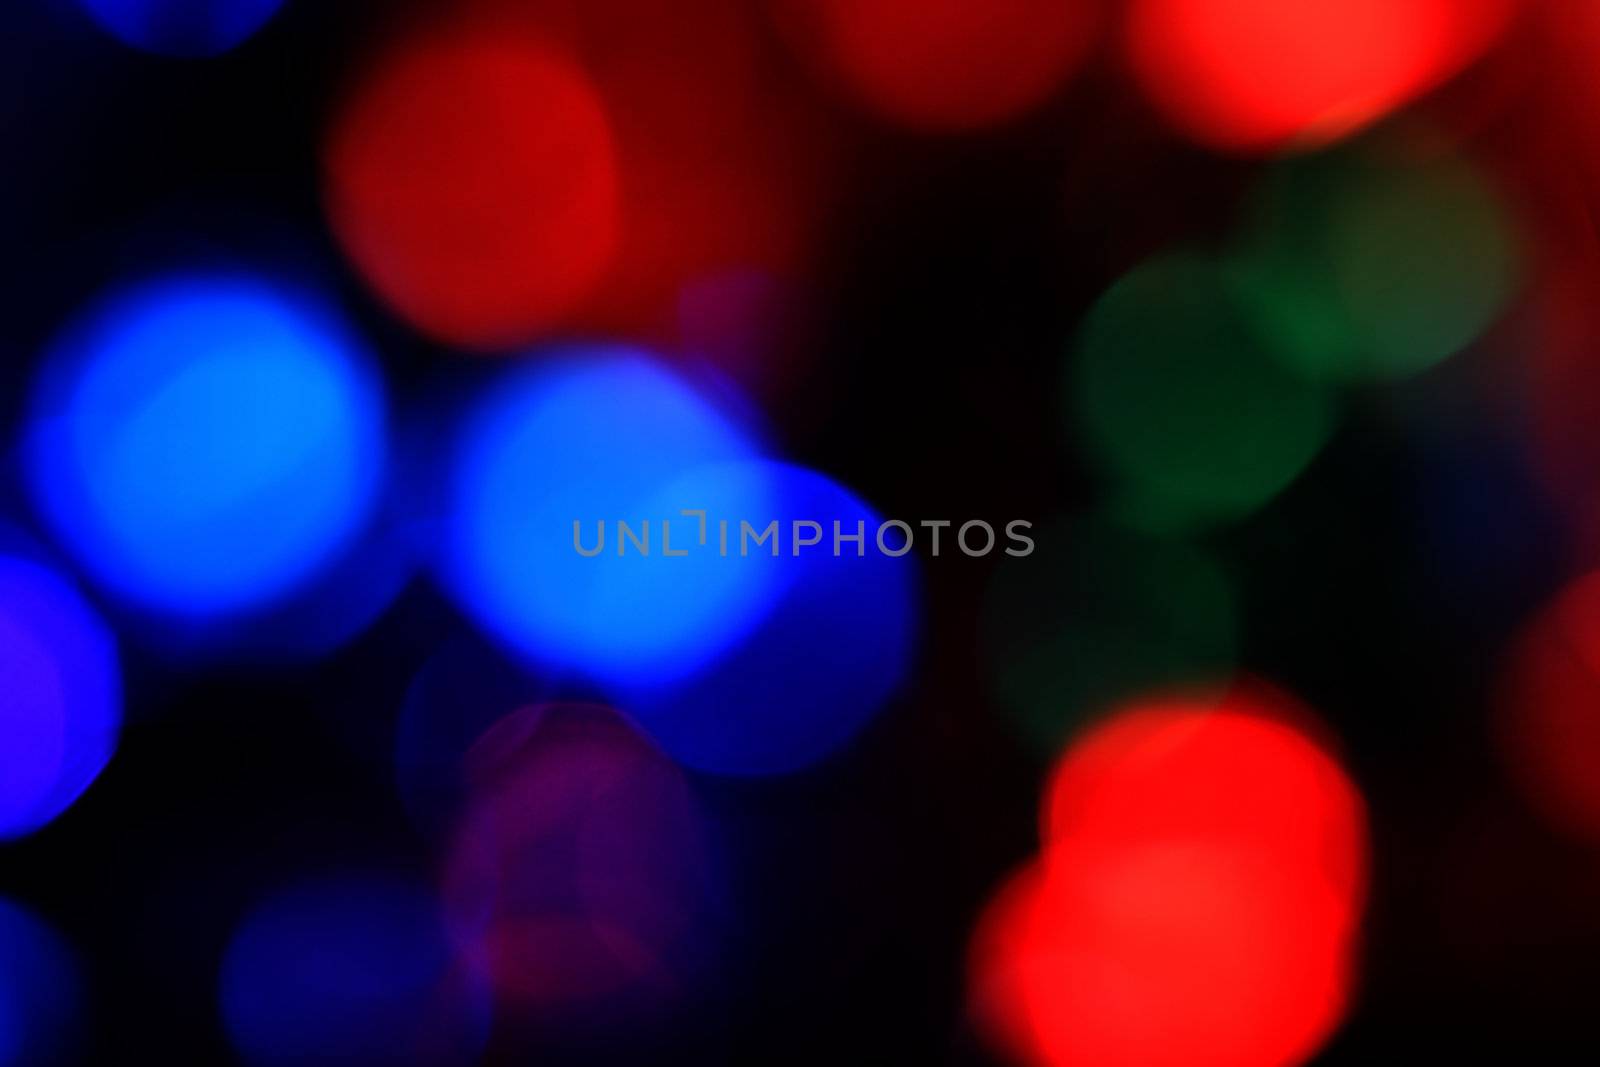 Blurry pattern of colorful decoration lights